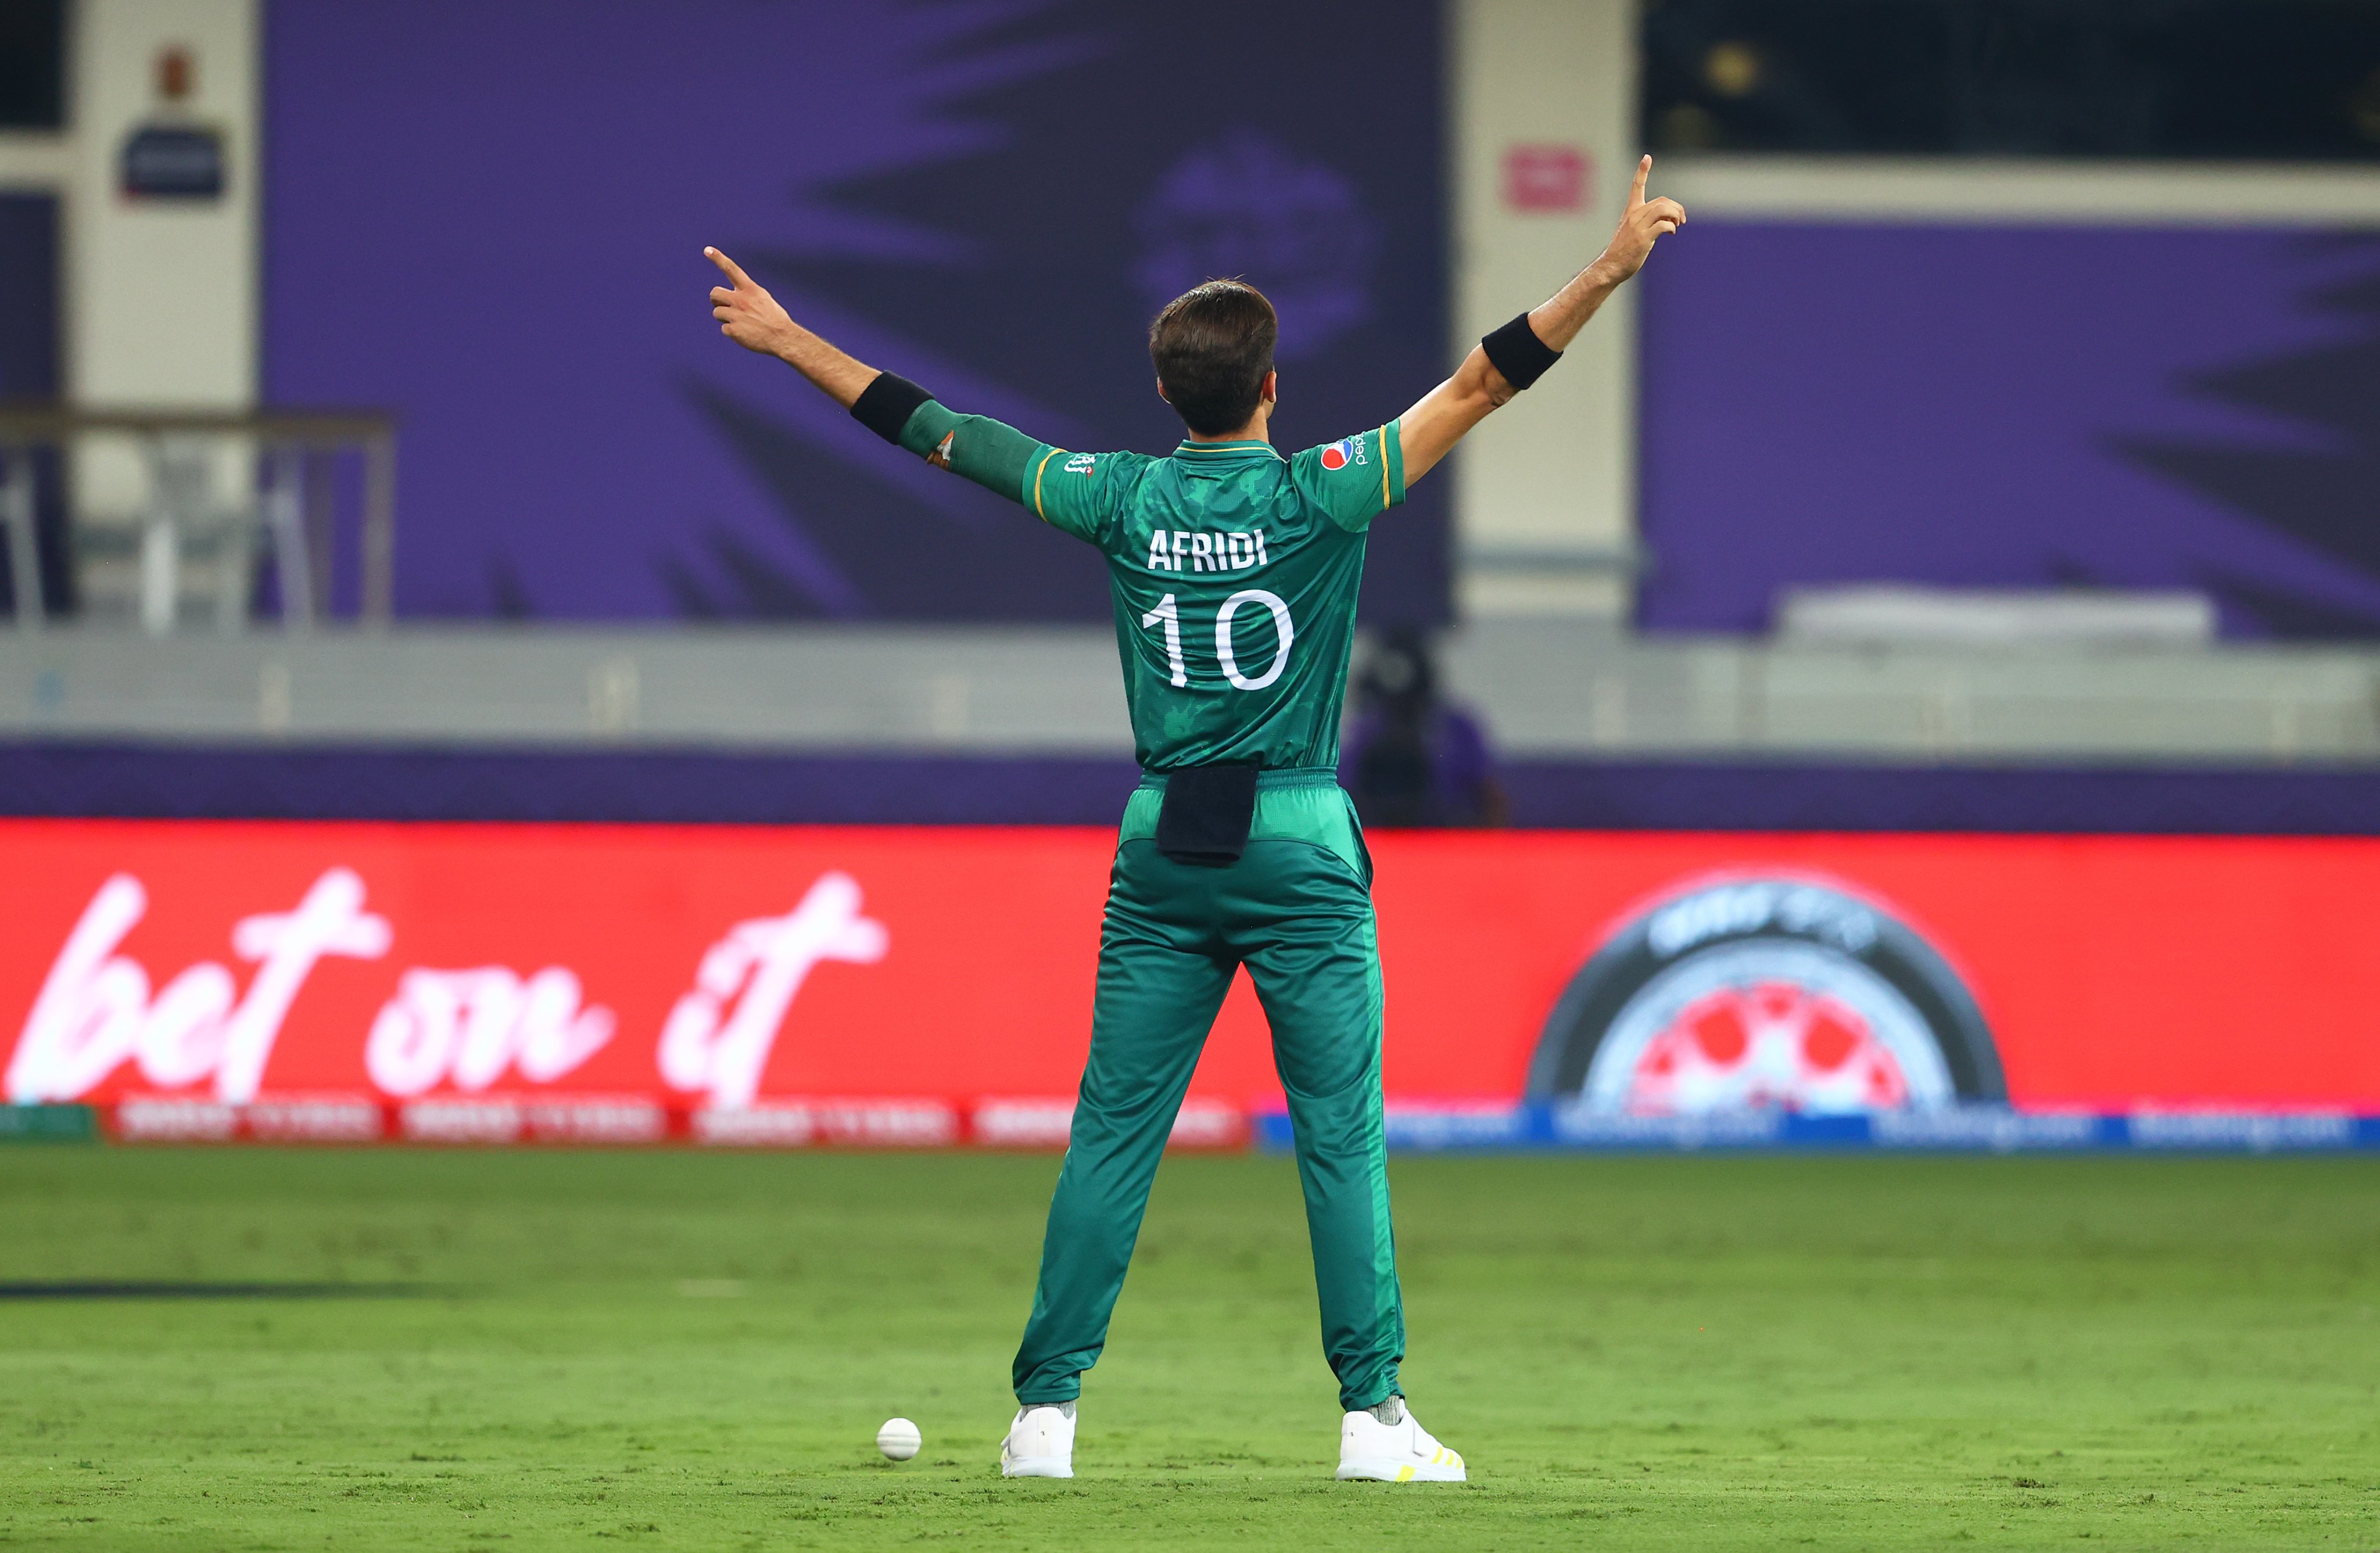 Shaheen Afridi enacts dismissals of Virat, Rohit and KL Rahul